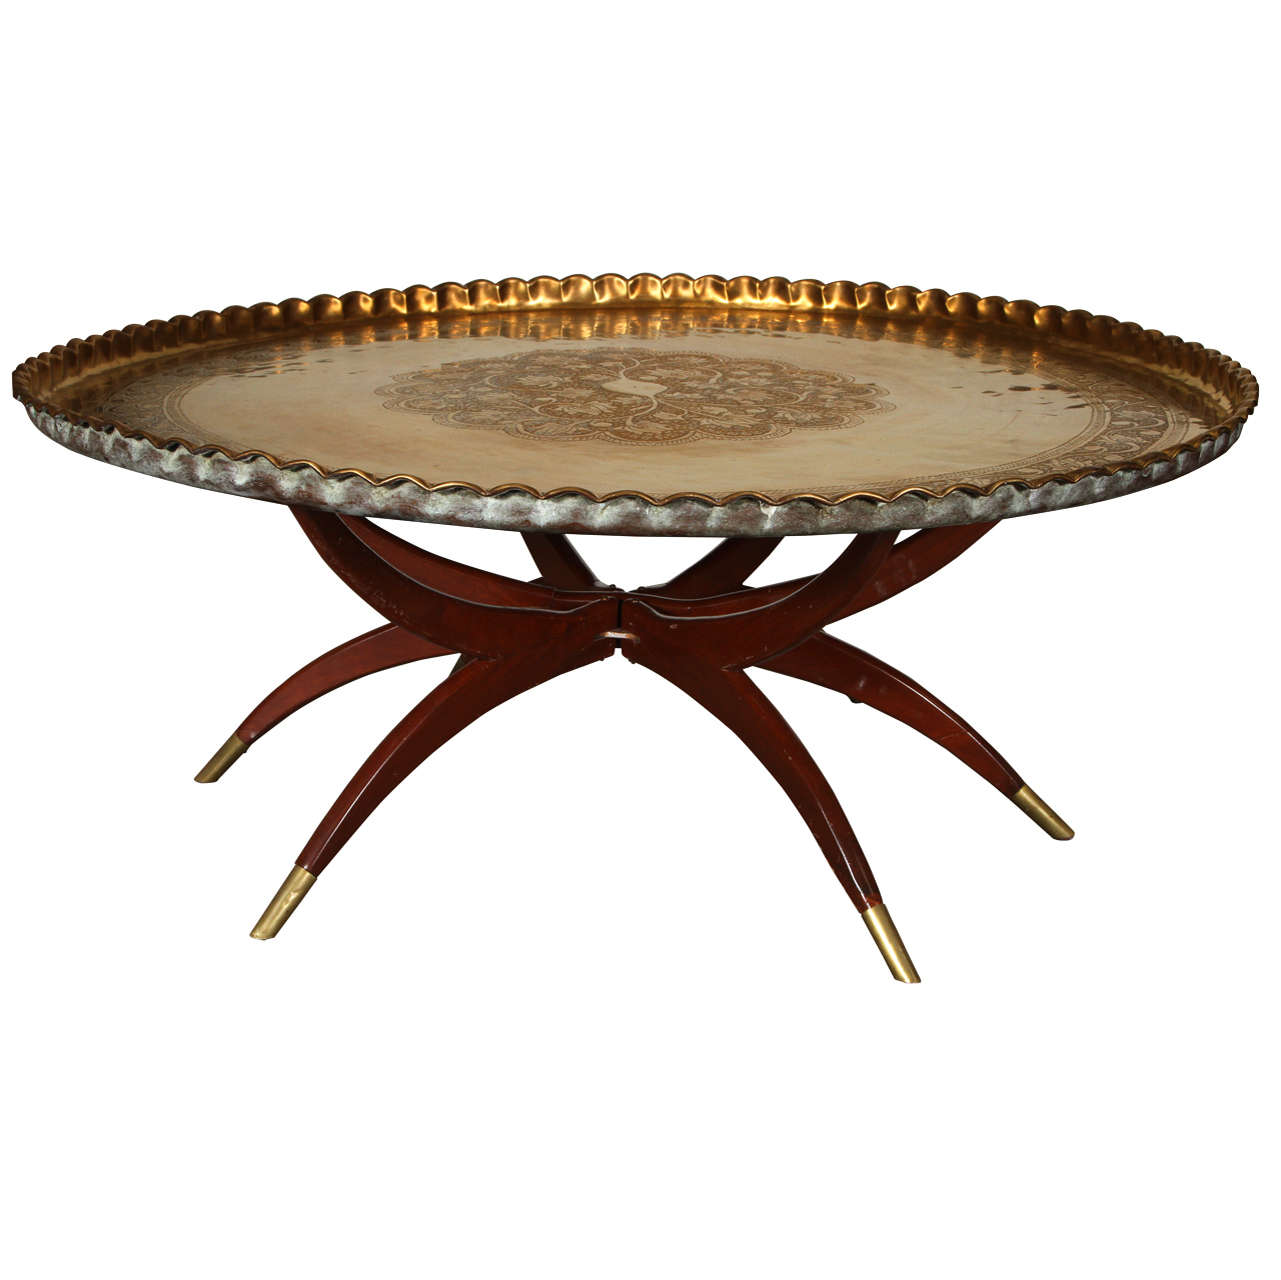 Large Moroccan Round Brass Tray Table on Folding Stand 45 in.